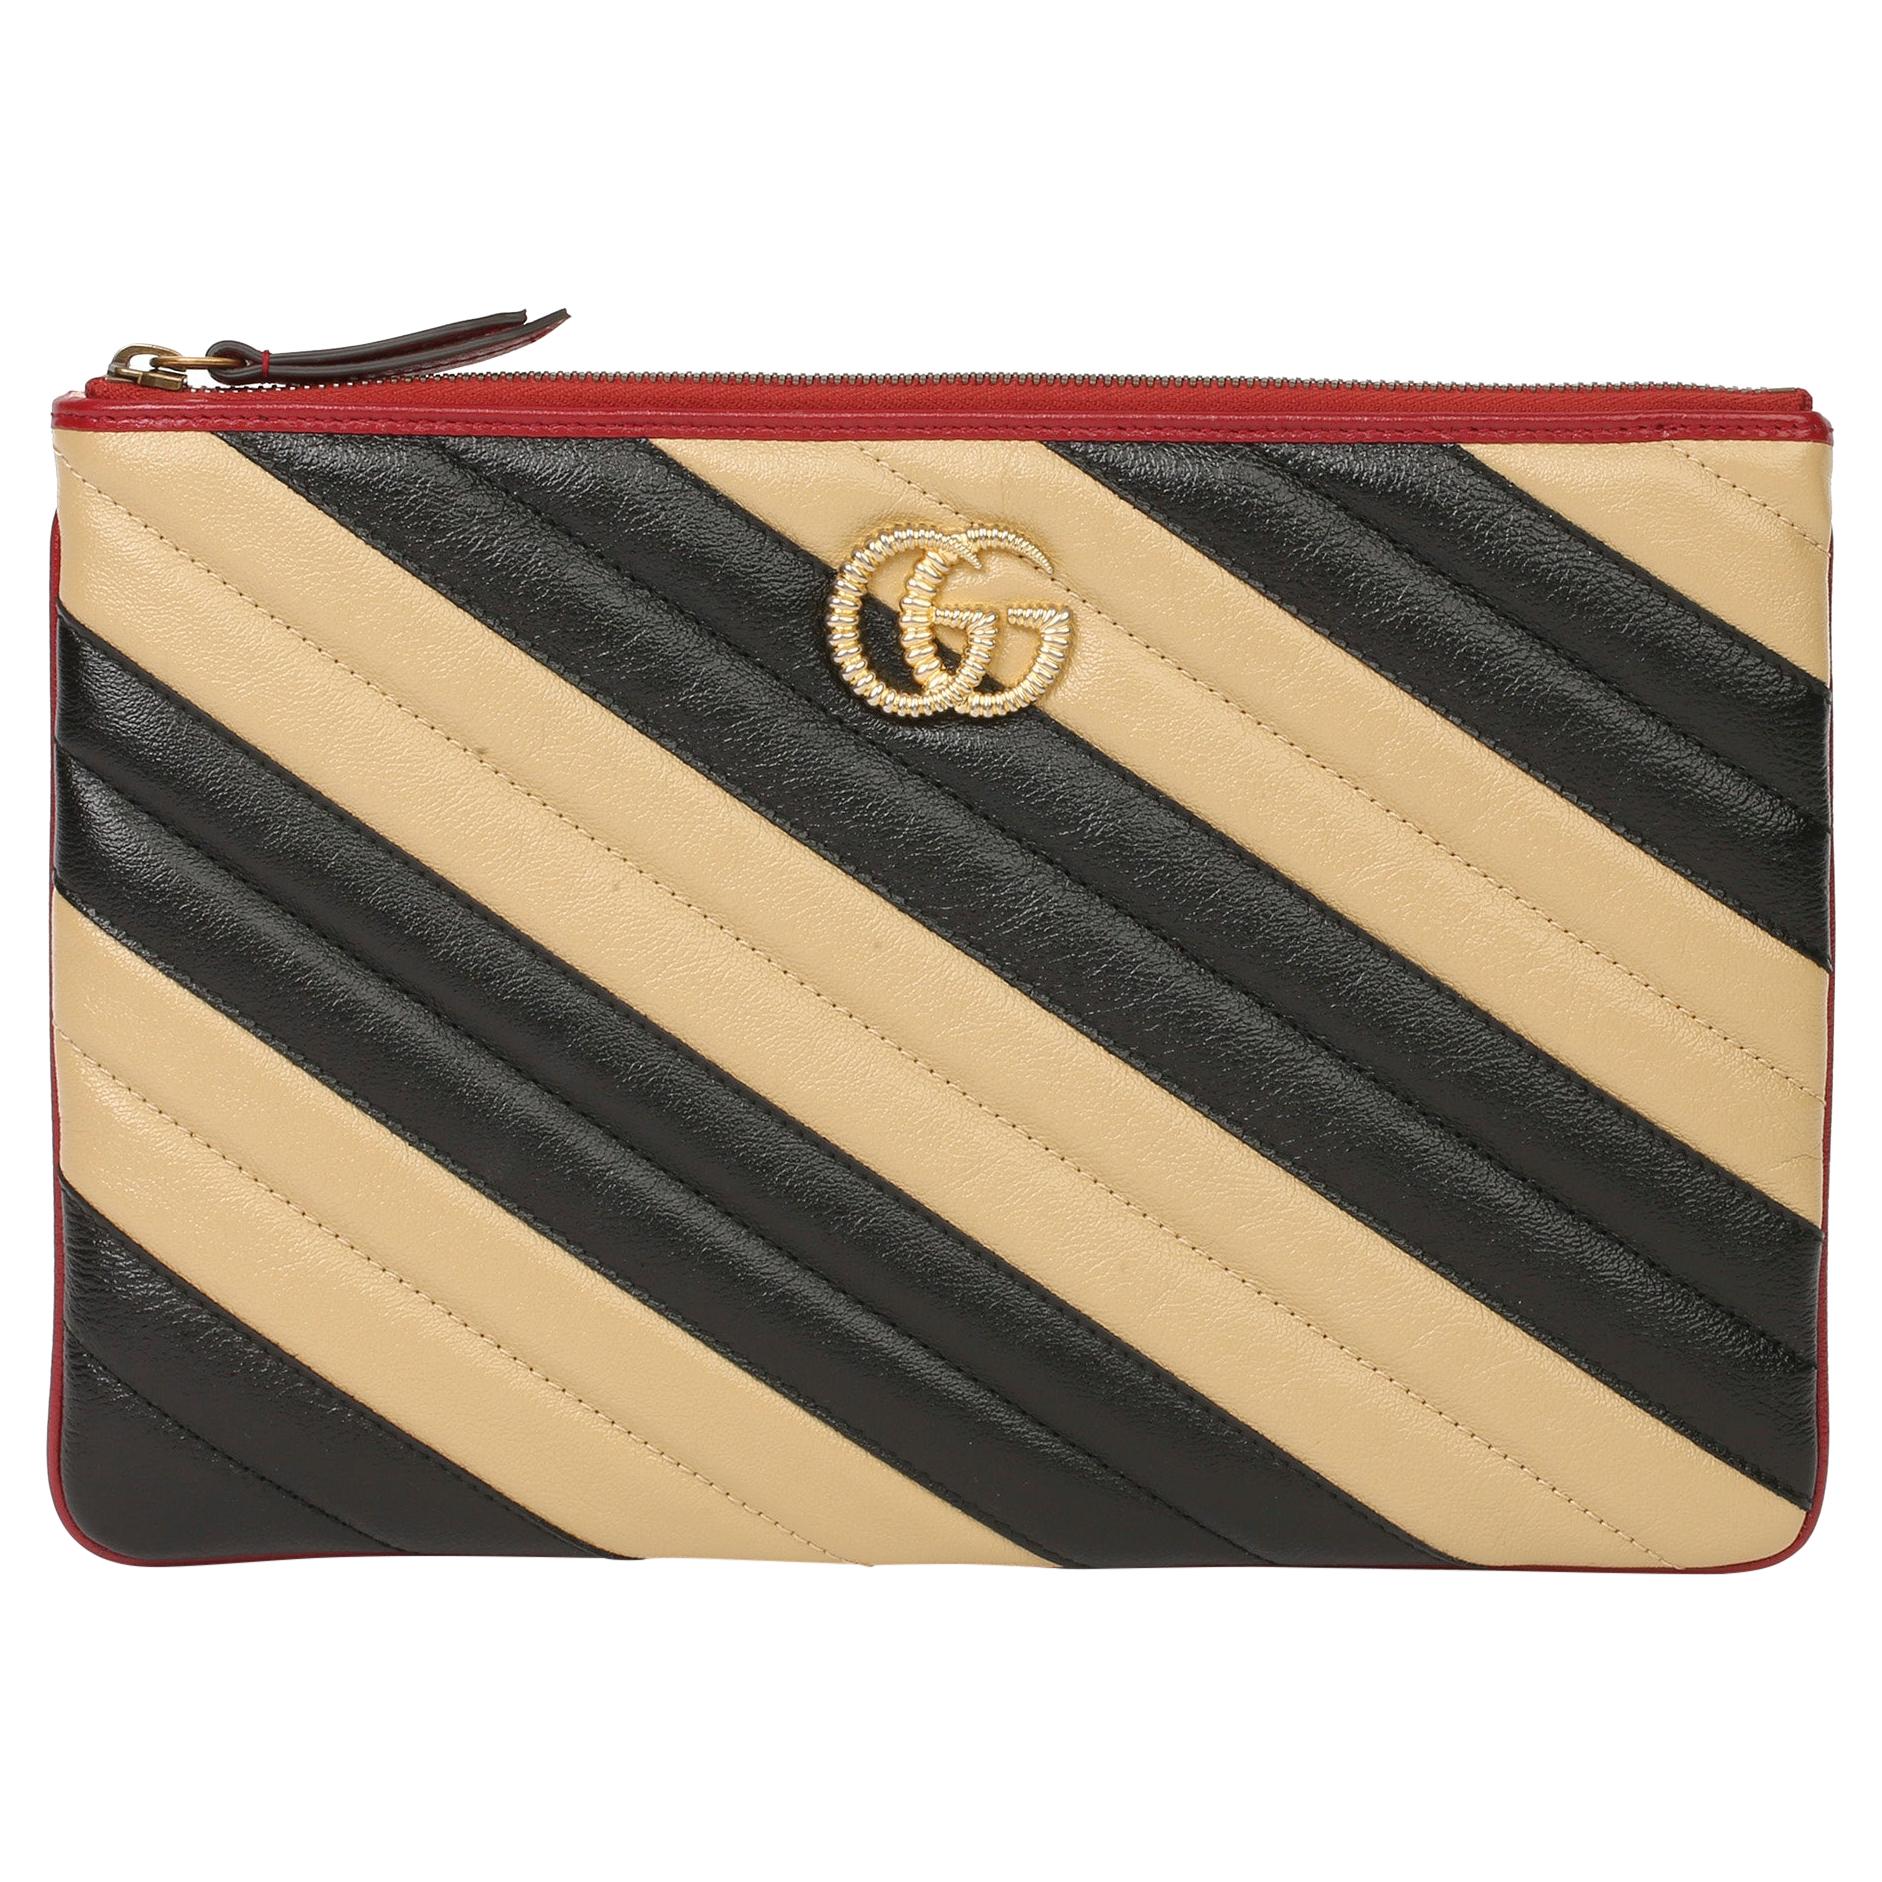 2020 Gucci "GUCCI Black, Cream & Red Diagonal Quilted Aged Leather Marmont Pouch